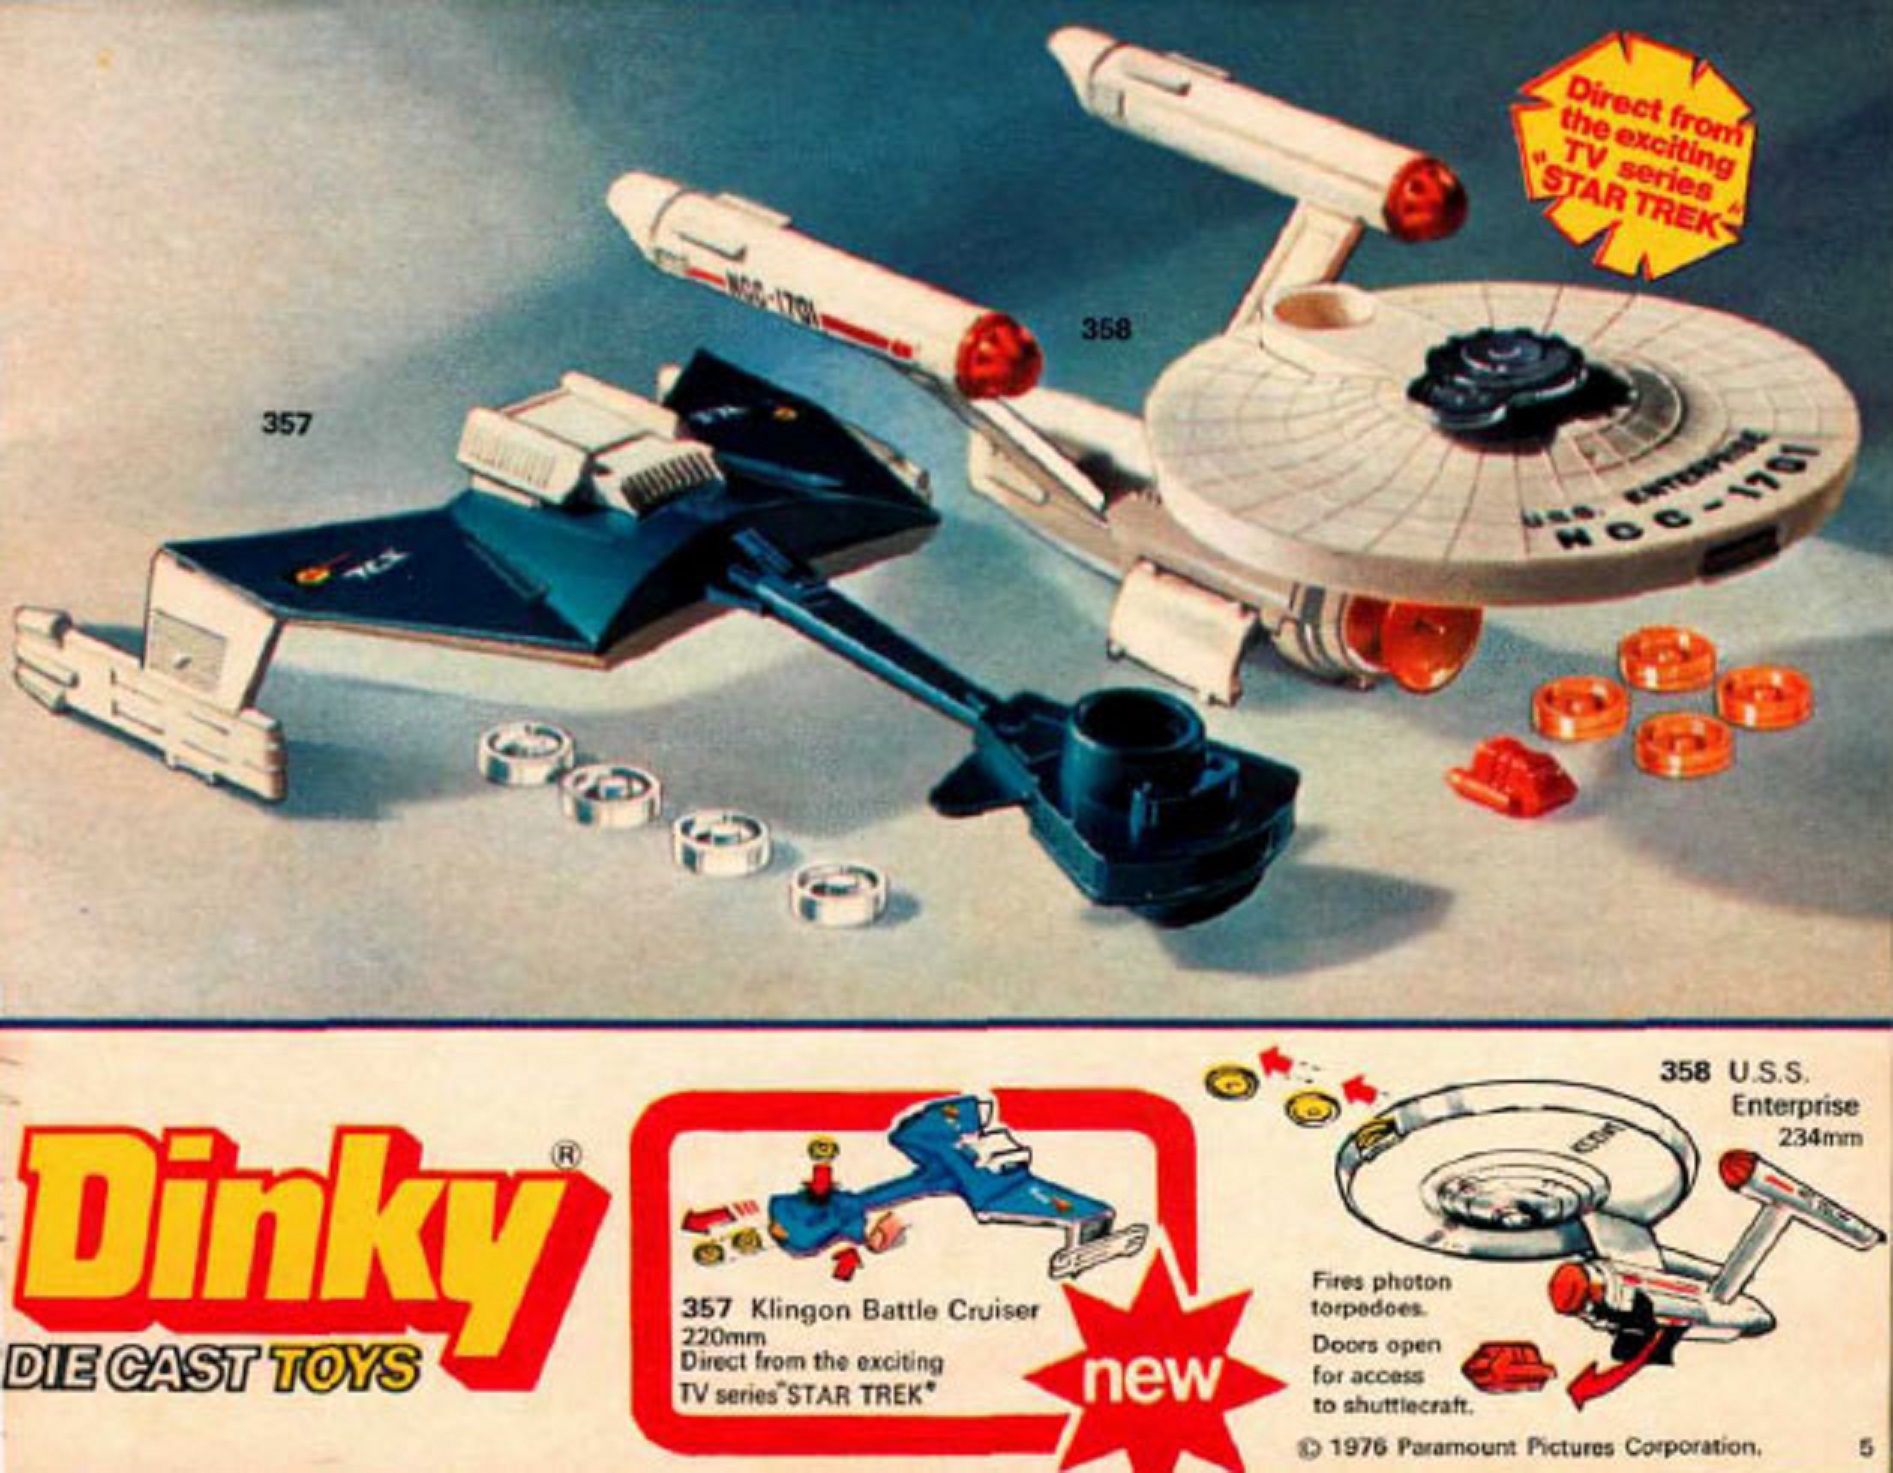 1970s space toys